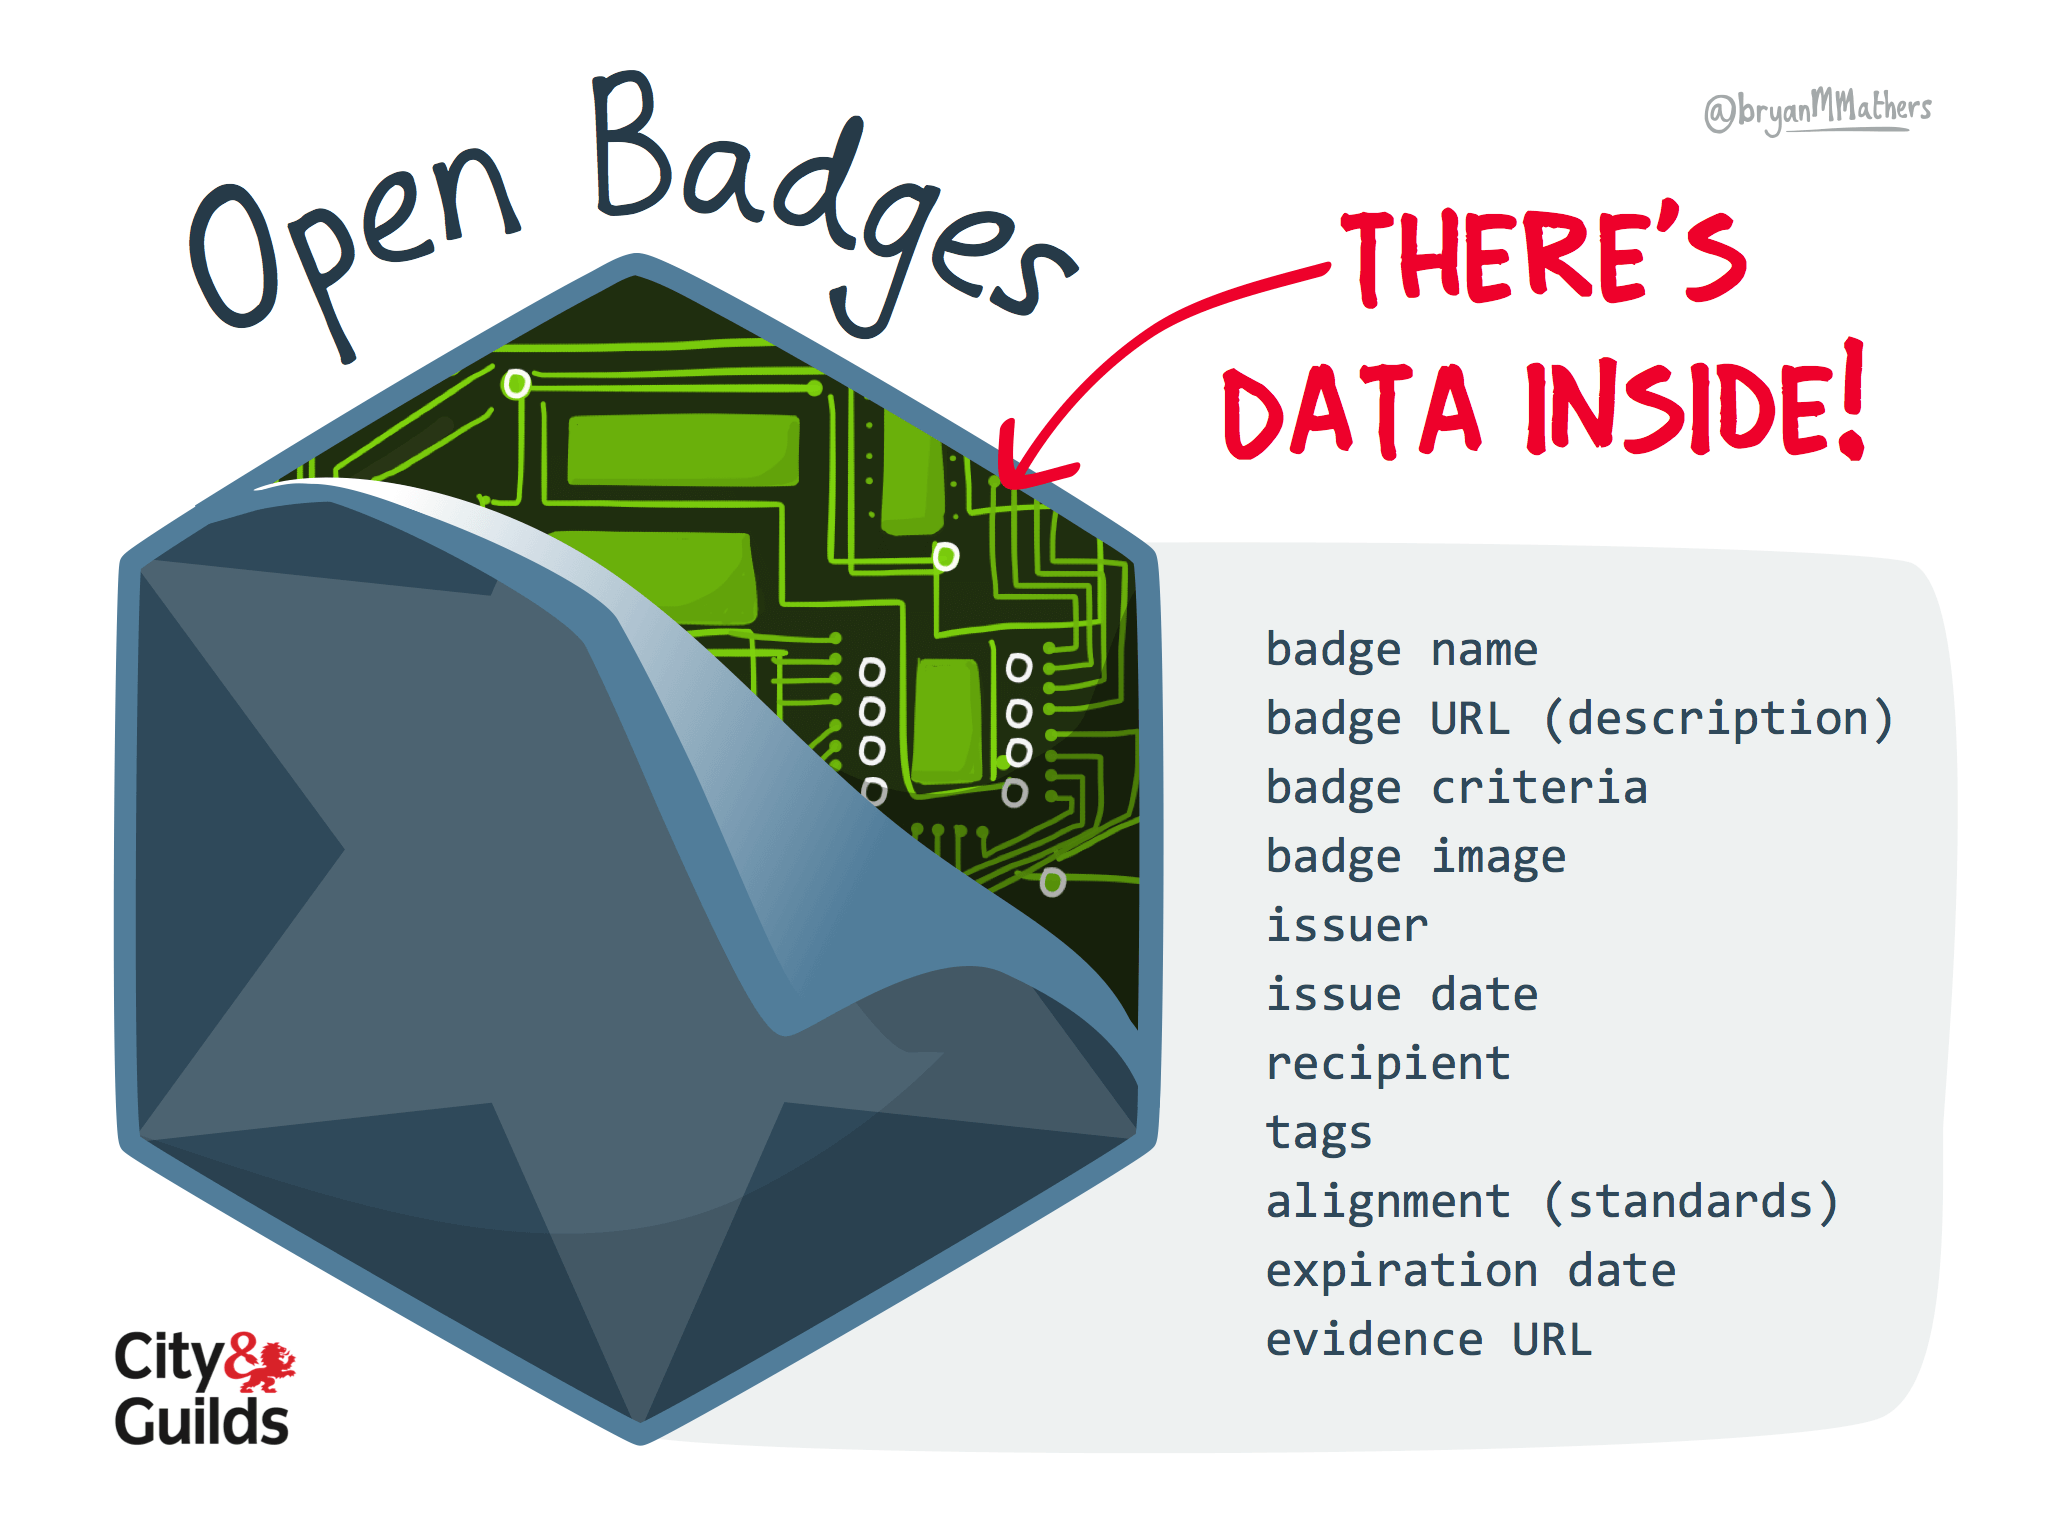 Open digital badges have data, like the issuer and recipient, locked inside them so they can be verified. There’s data inside open badges by Visual Thinkery is licenced under CC-BY-ND for the City and Guilds of London Institute